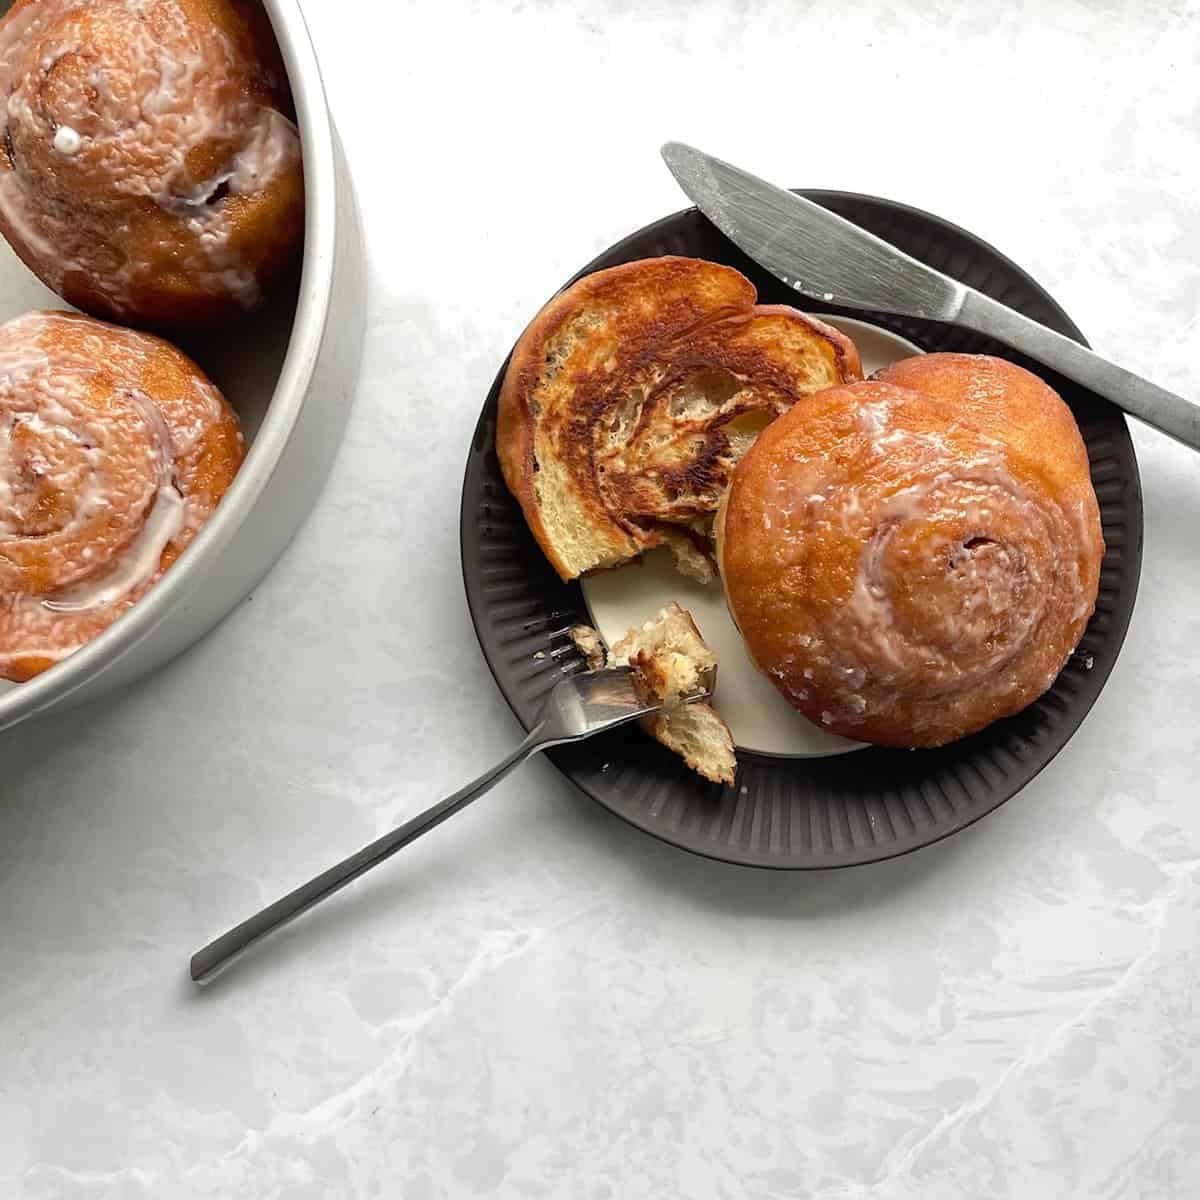 Grilled glazed honey bun on a plate with fork and knife next to pan full of glazed honey buns.